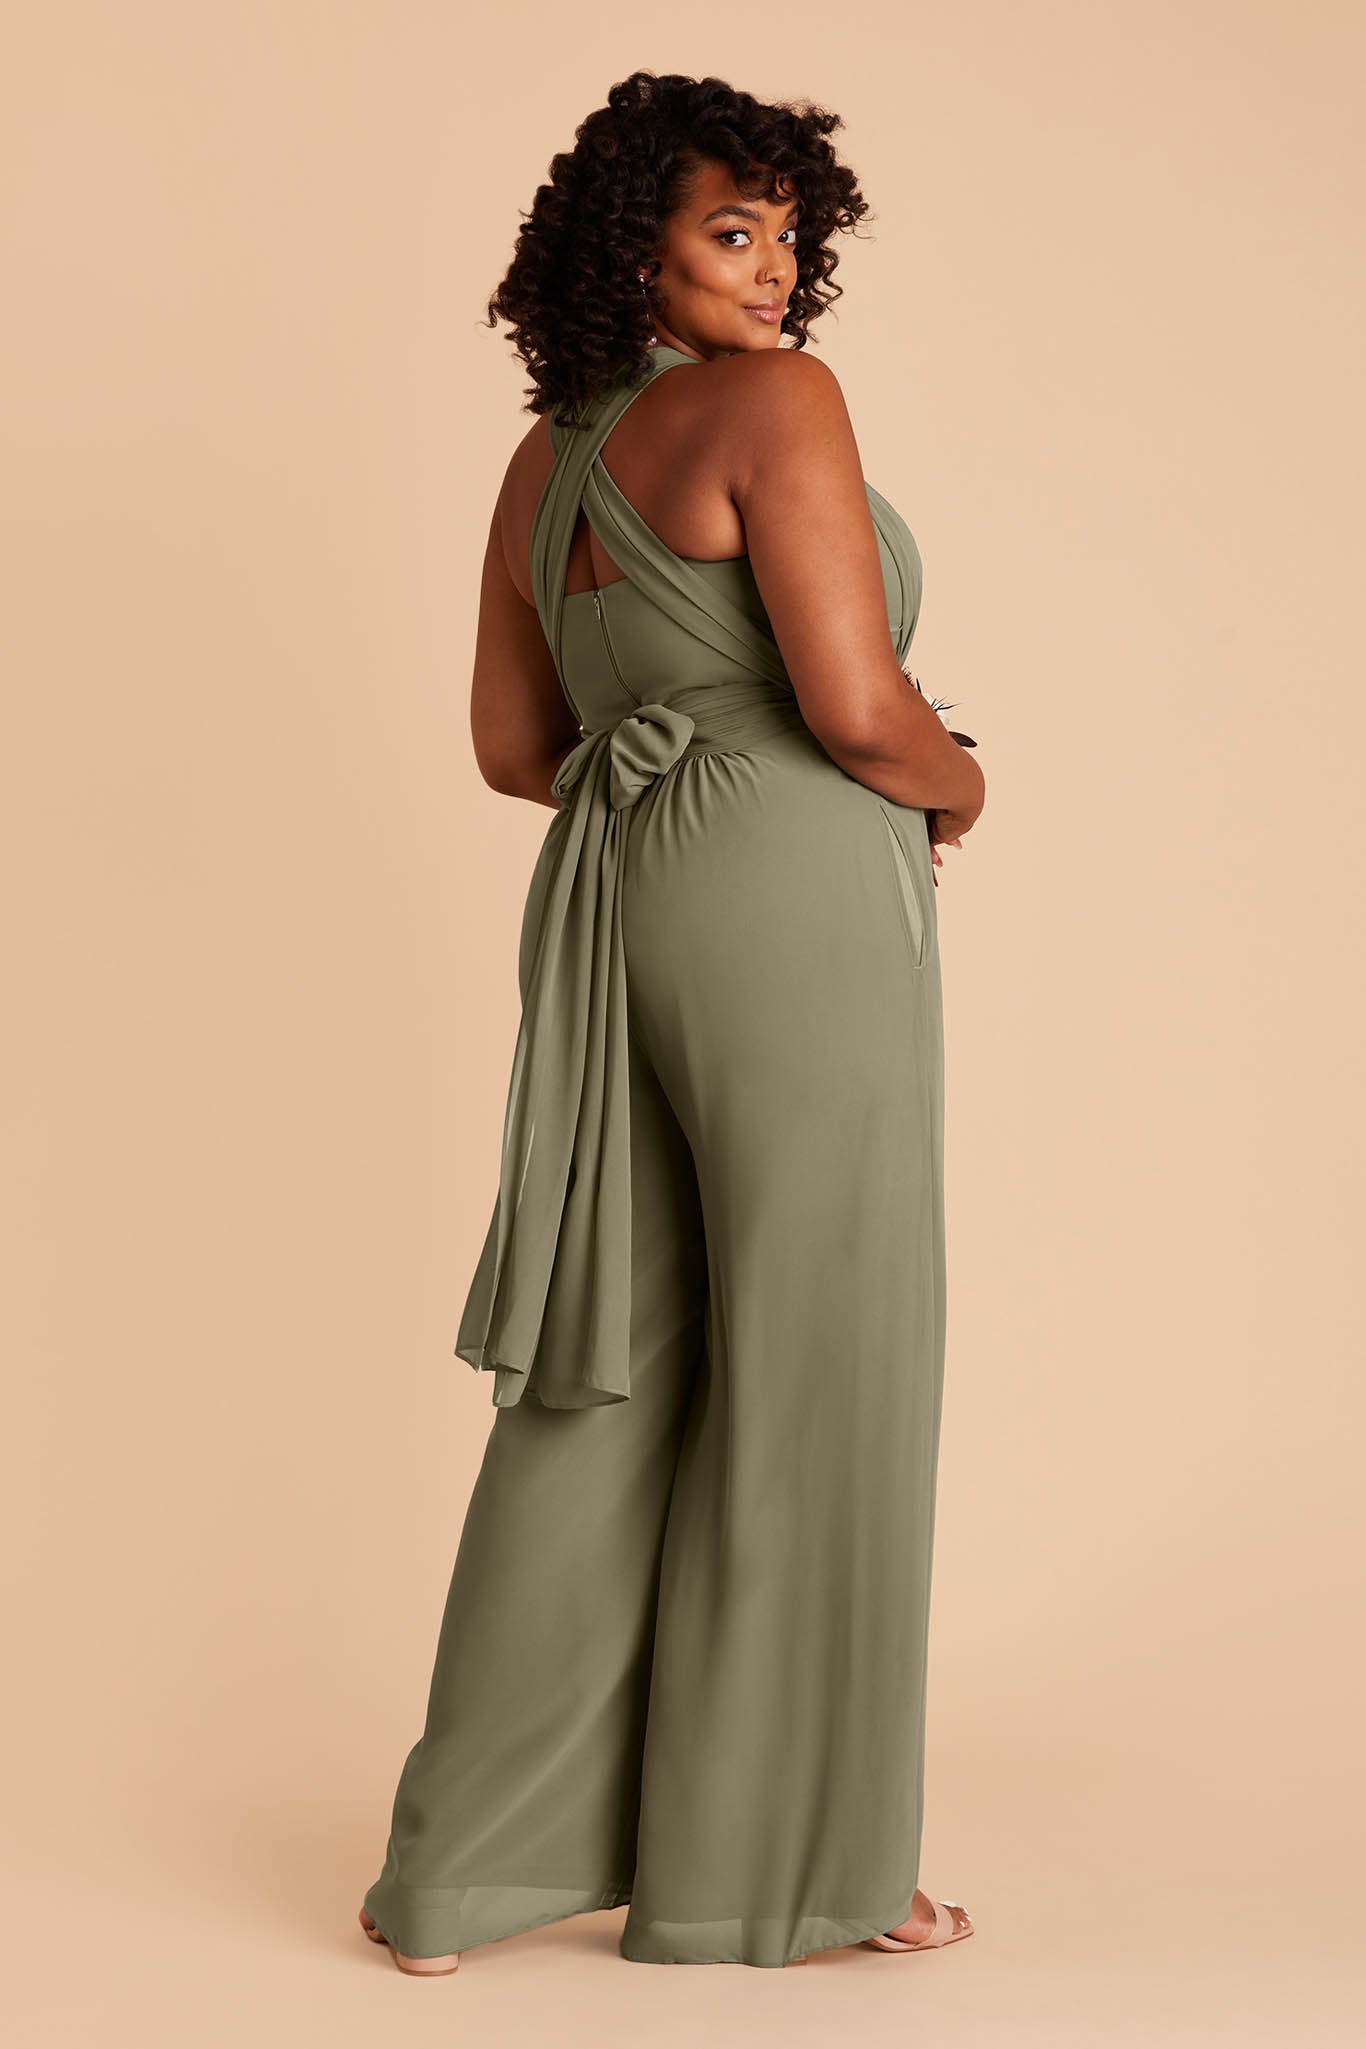 Green Formal Sleeveless Jumpsuit, Women Overall for Wedding, Bridal Jumpsuit